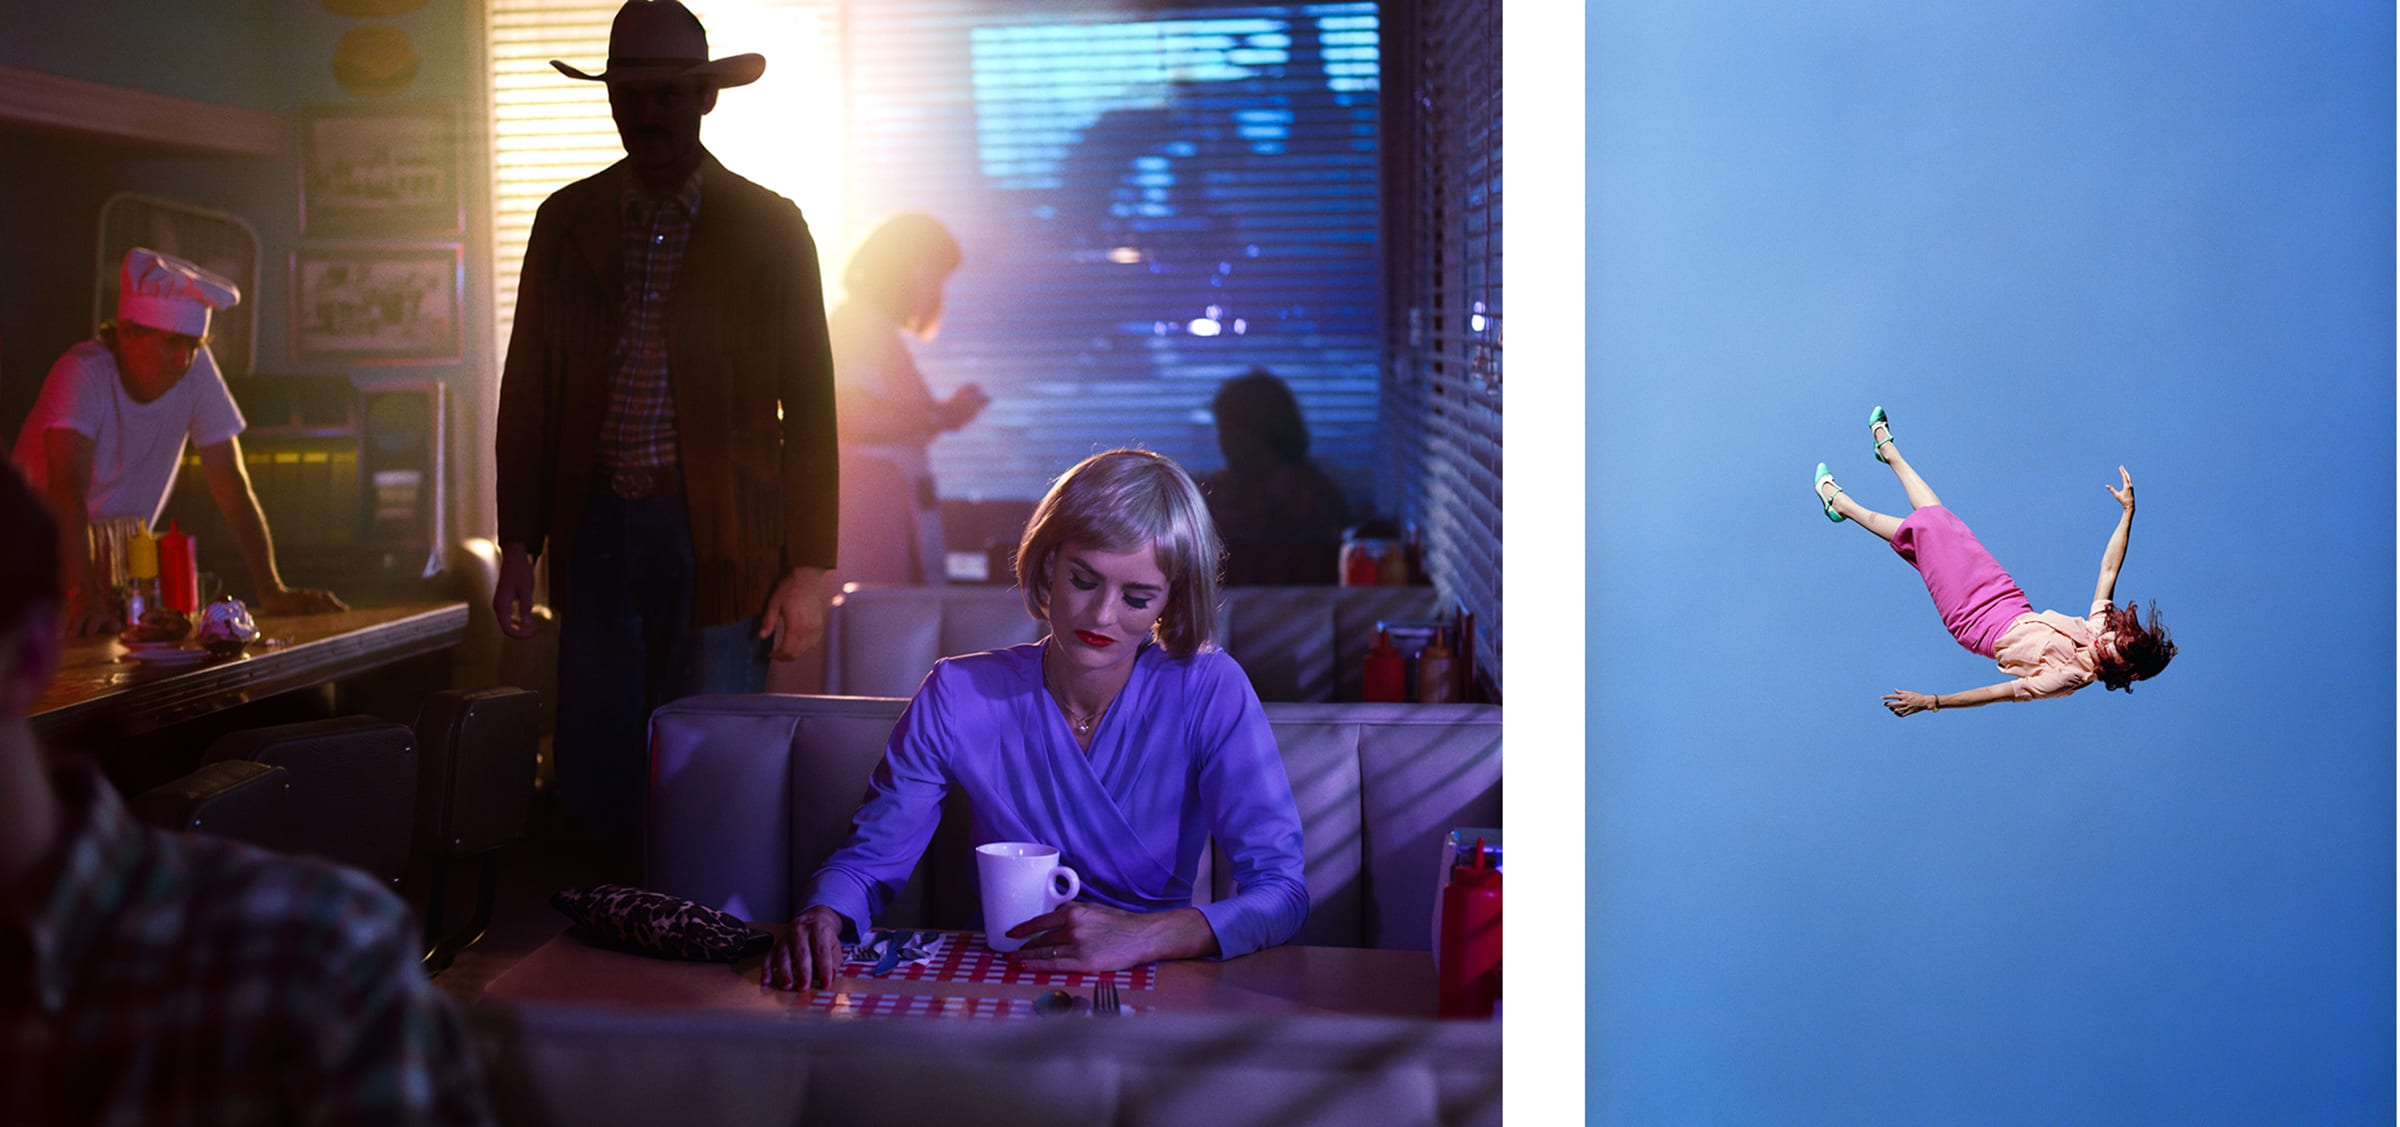 Alex Prager, Diner (left) and Mary Suspended Between Heaven and Earth (right), 2022. Courtesy of Alex Prager Studio and Lehmann Maupin, New York, Hong Kong, Seoul, and London.